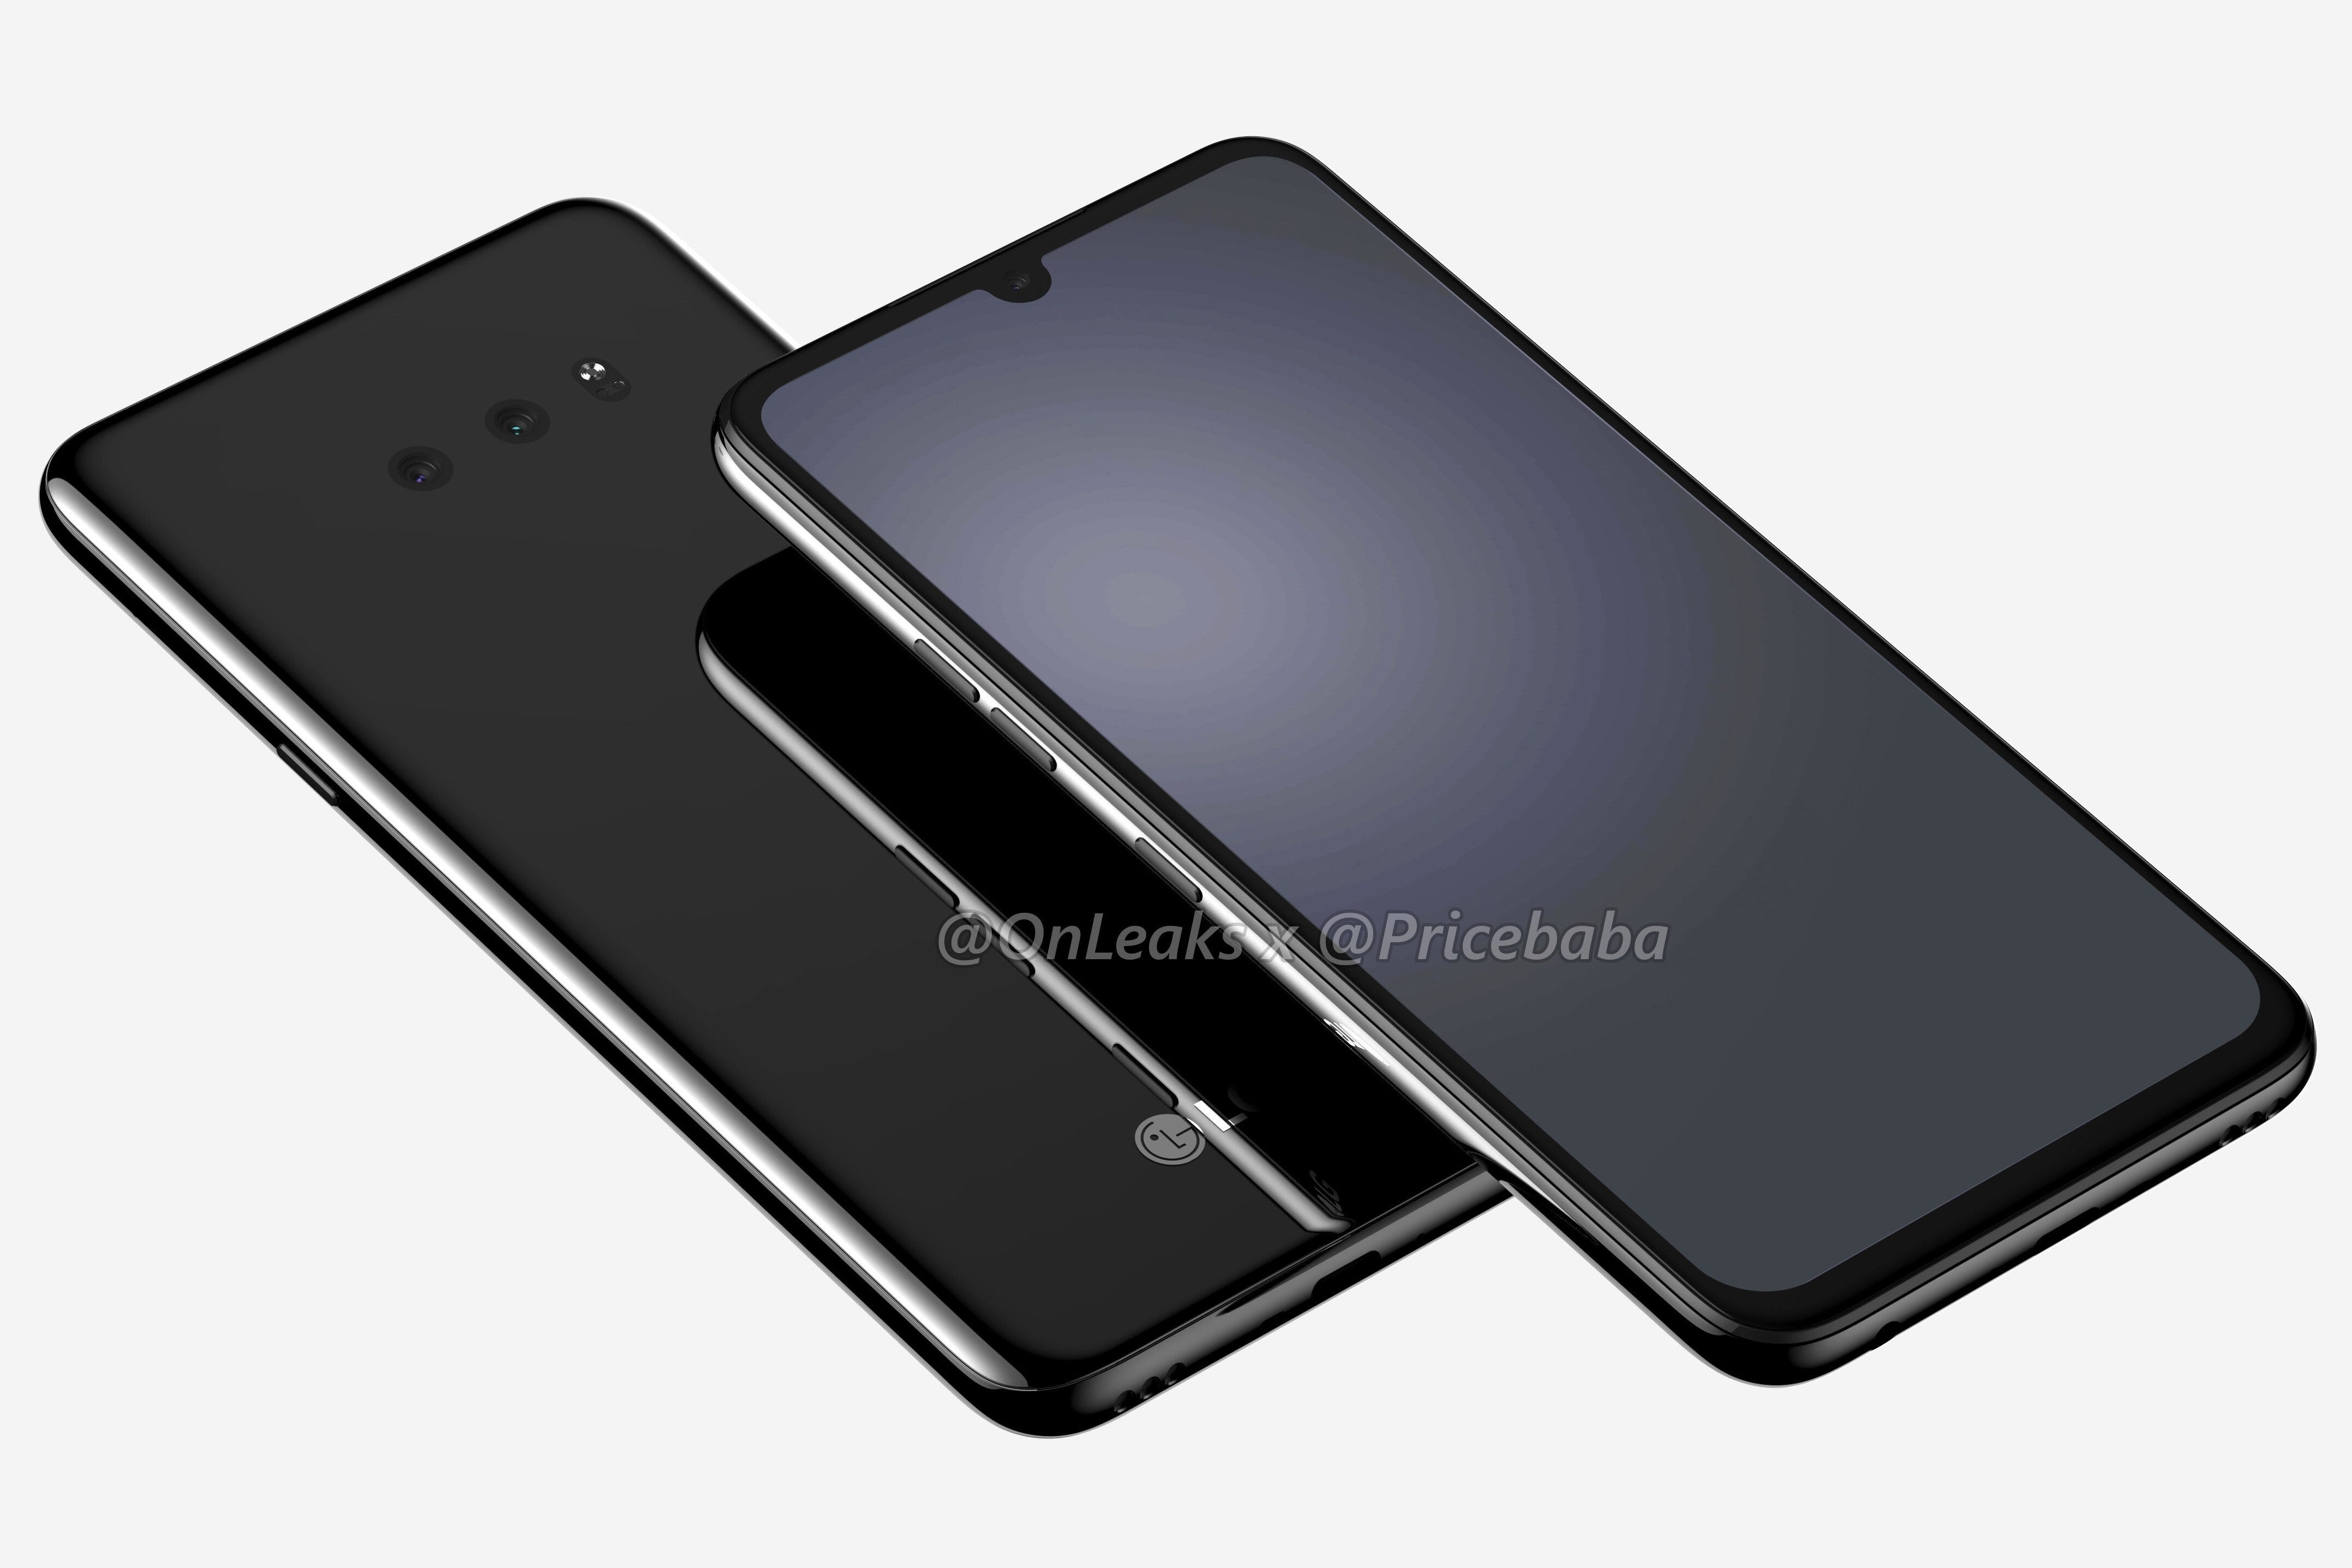 LG G8X ThinQ design leak shows smaller notch, two rear cameras